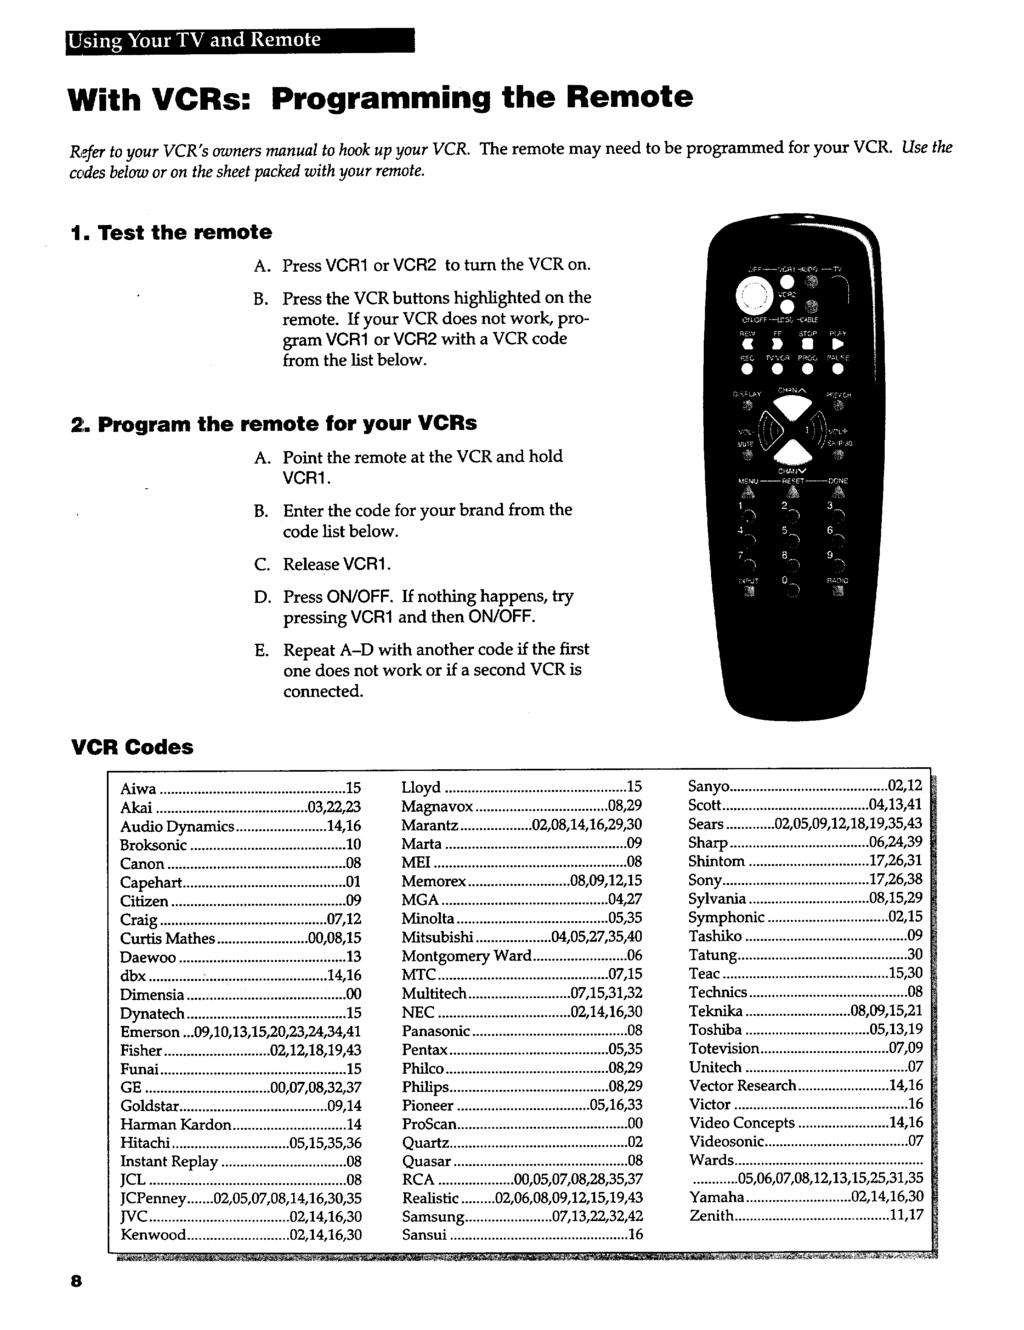 With VCRs: Programming the Remote R,_er to your VCR's owners manual to hook up your VCR. The remote may need to be programmed for your VCR. Use the codes below or on the sheet packed with your remote.